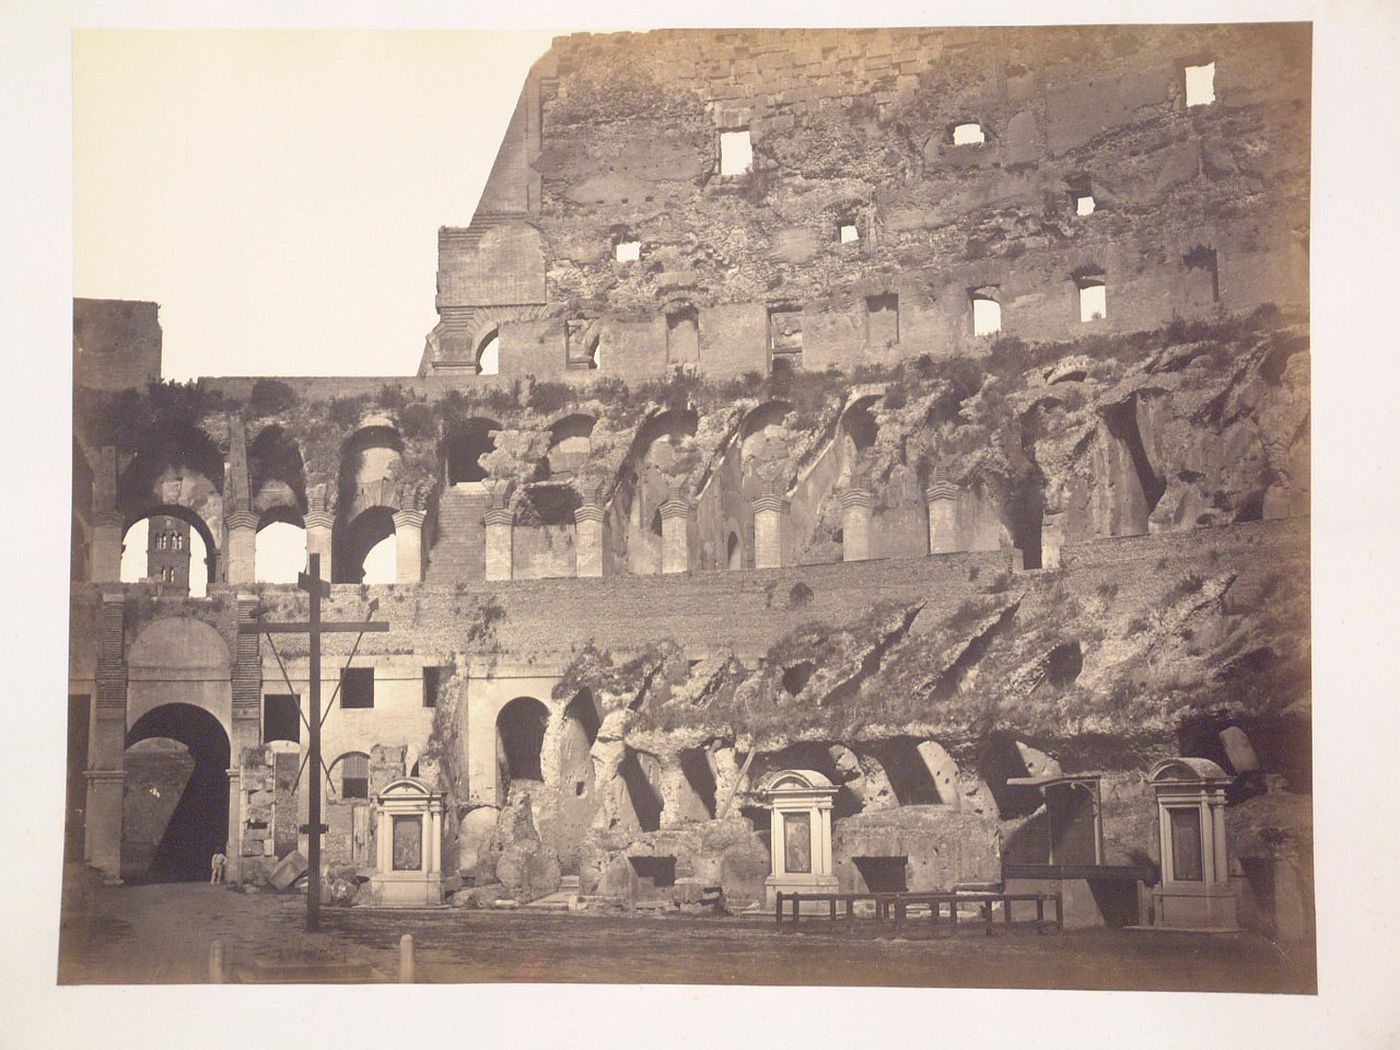 View of the interior of the Colosseum, Rome, Italy